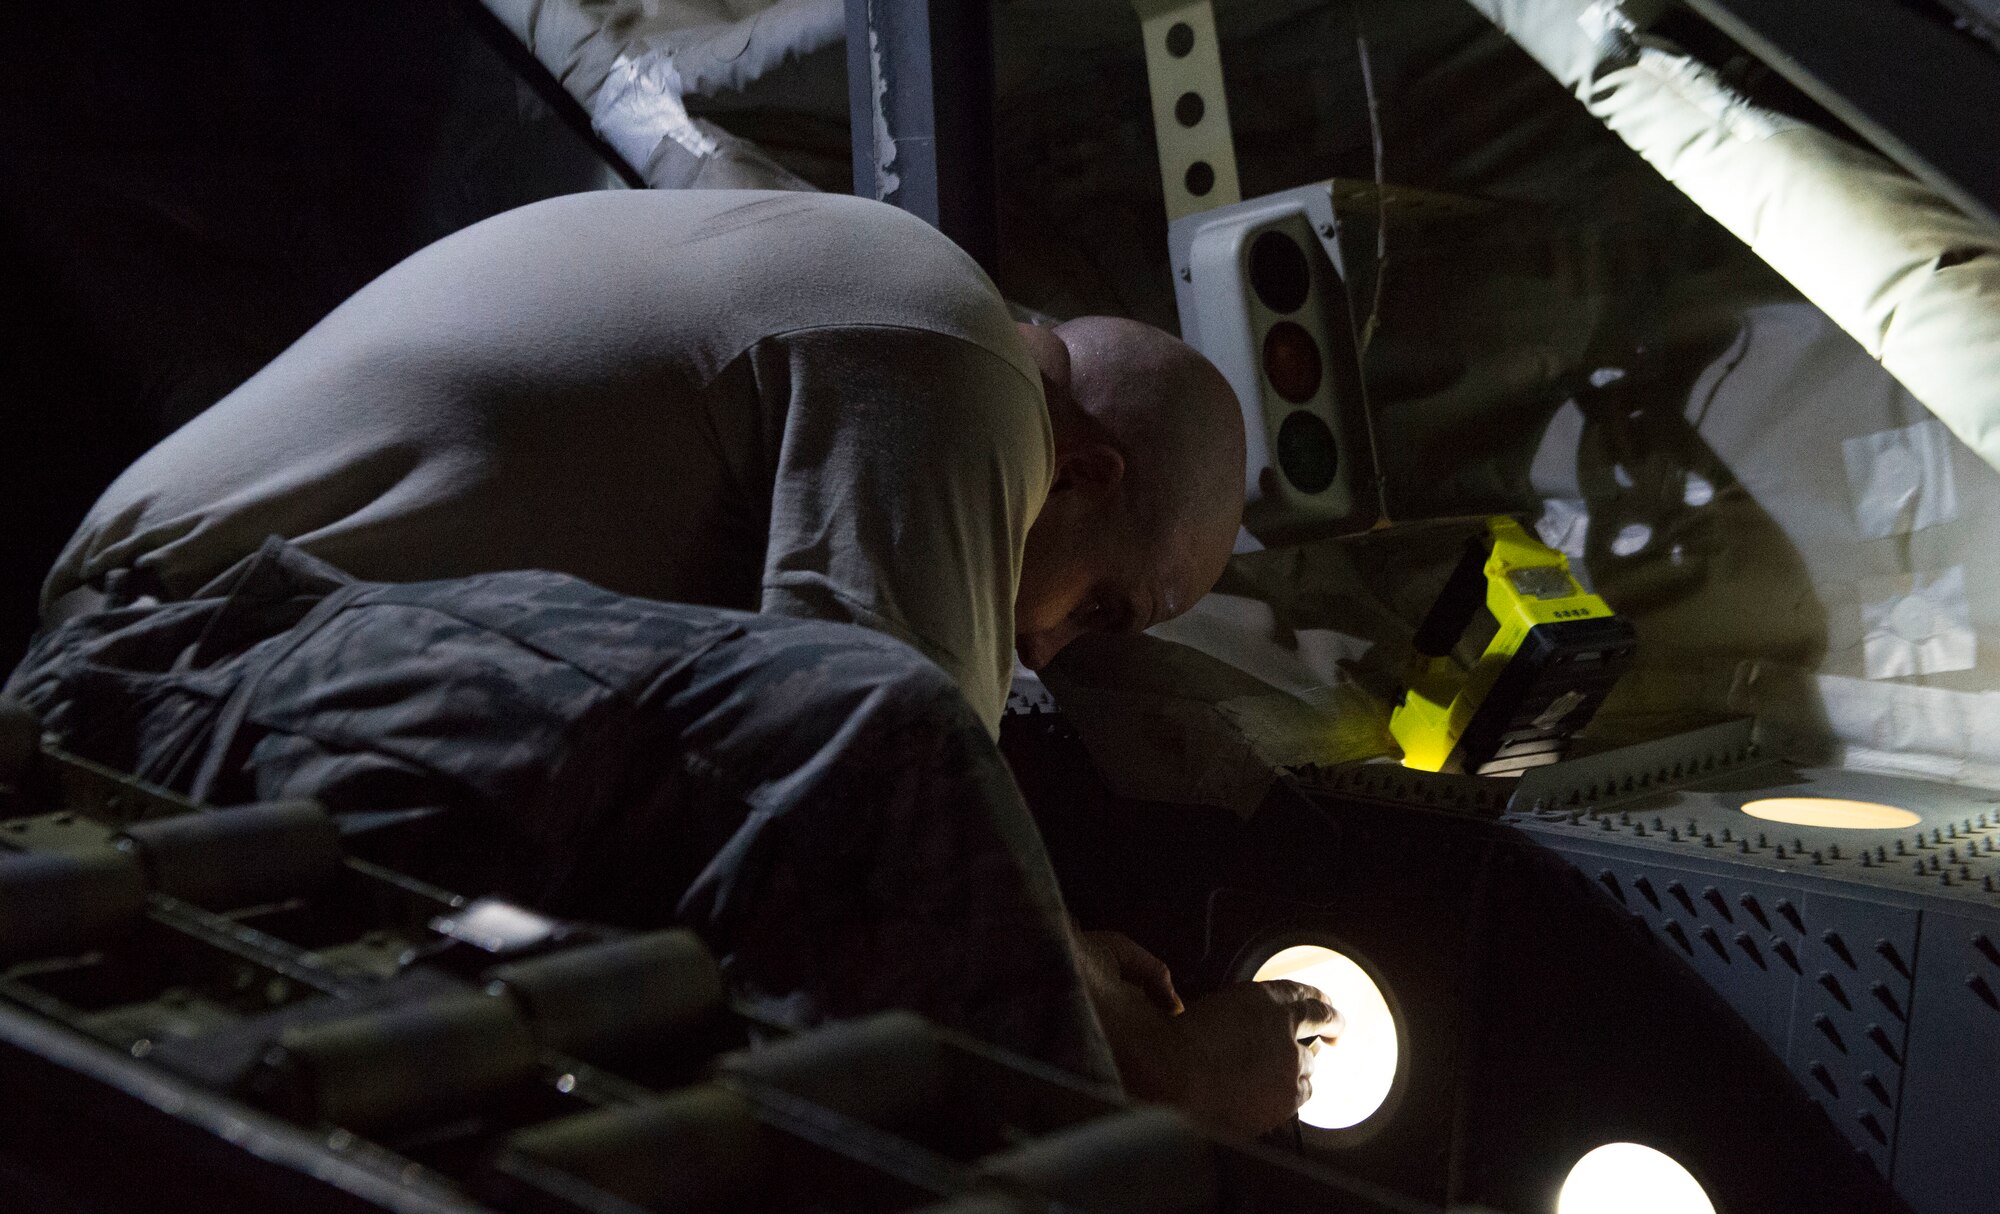 U.S. Air Force Master Sgt. Matthew Dowton, an Air Force corrosion manager assigned to Air Force Corrosion Protection Office, looks for corrosion and standing water in the back of a C-17 Globemaster III August 22, 2018, Altus Air Force Base, Oklahoma. AFCPO dispatches teams to Air Force bases in order to examine aircraft for corrosion.